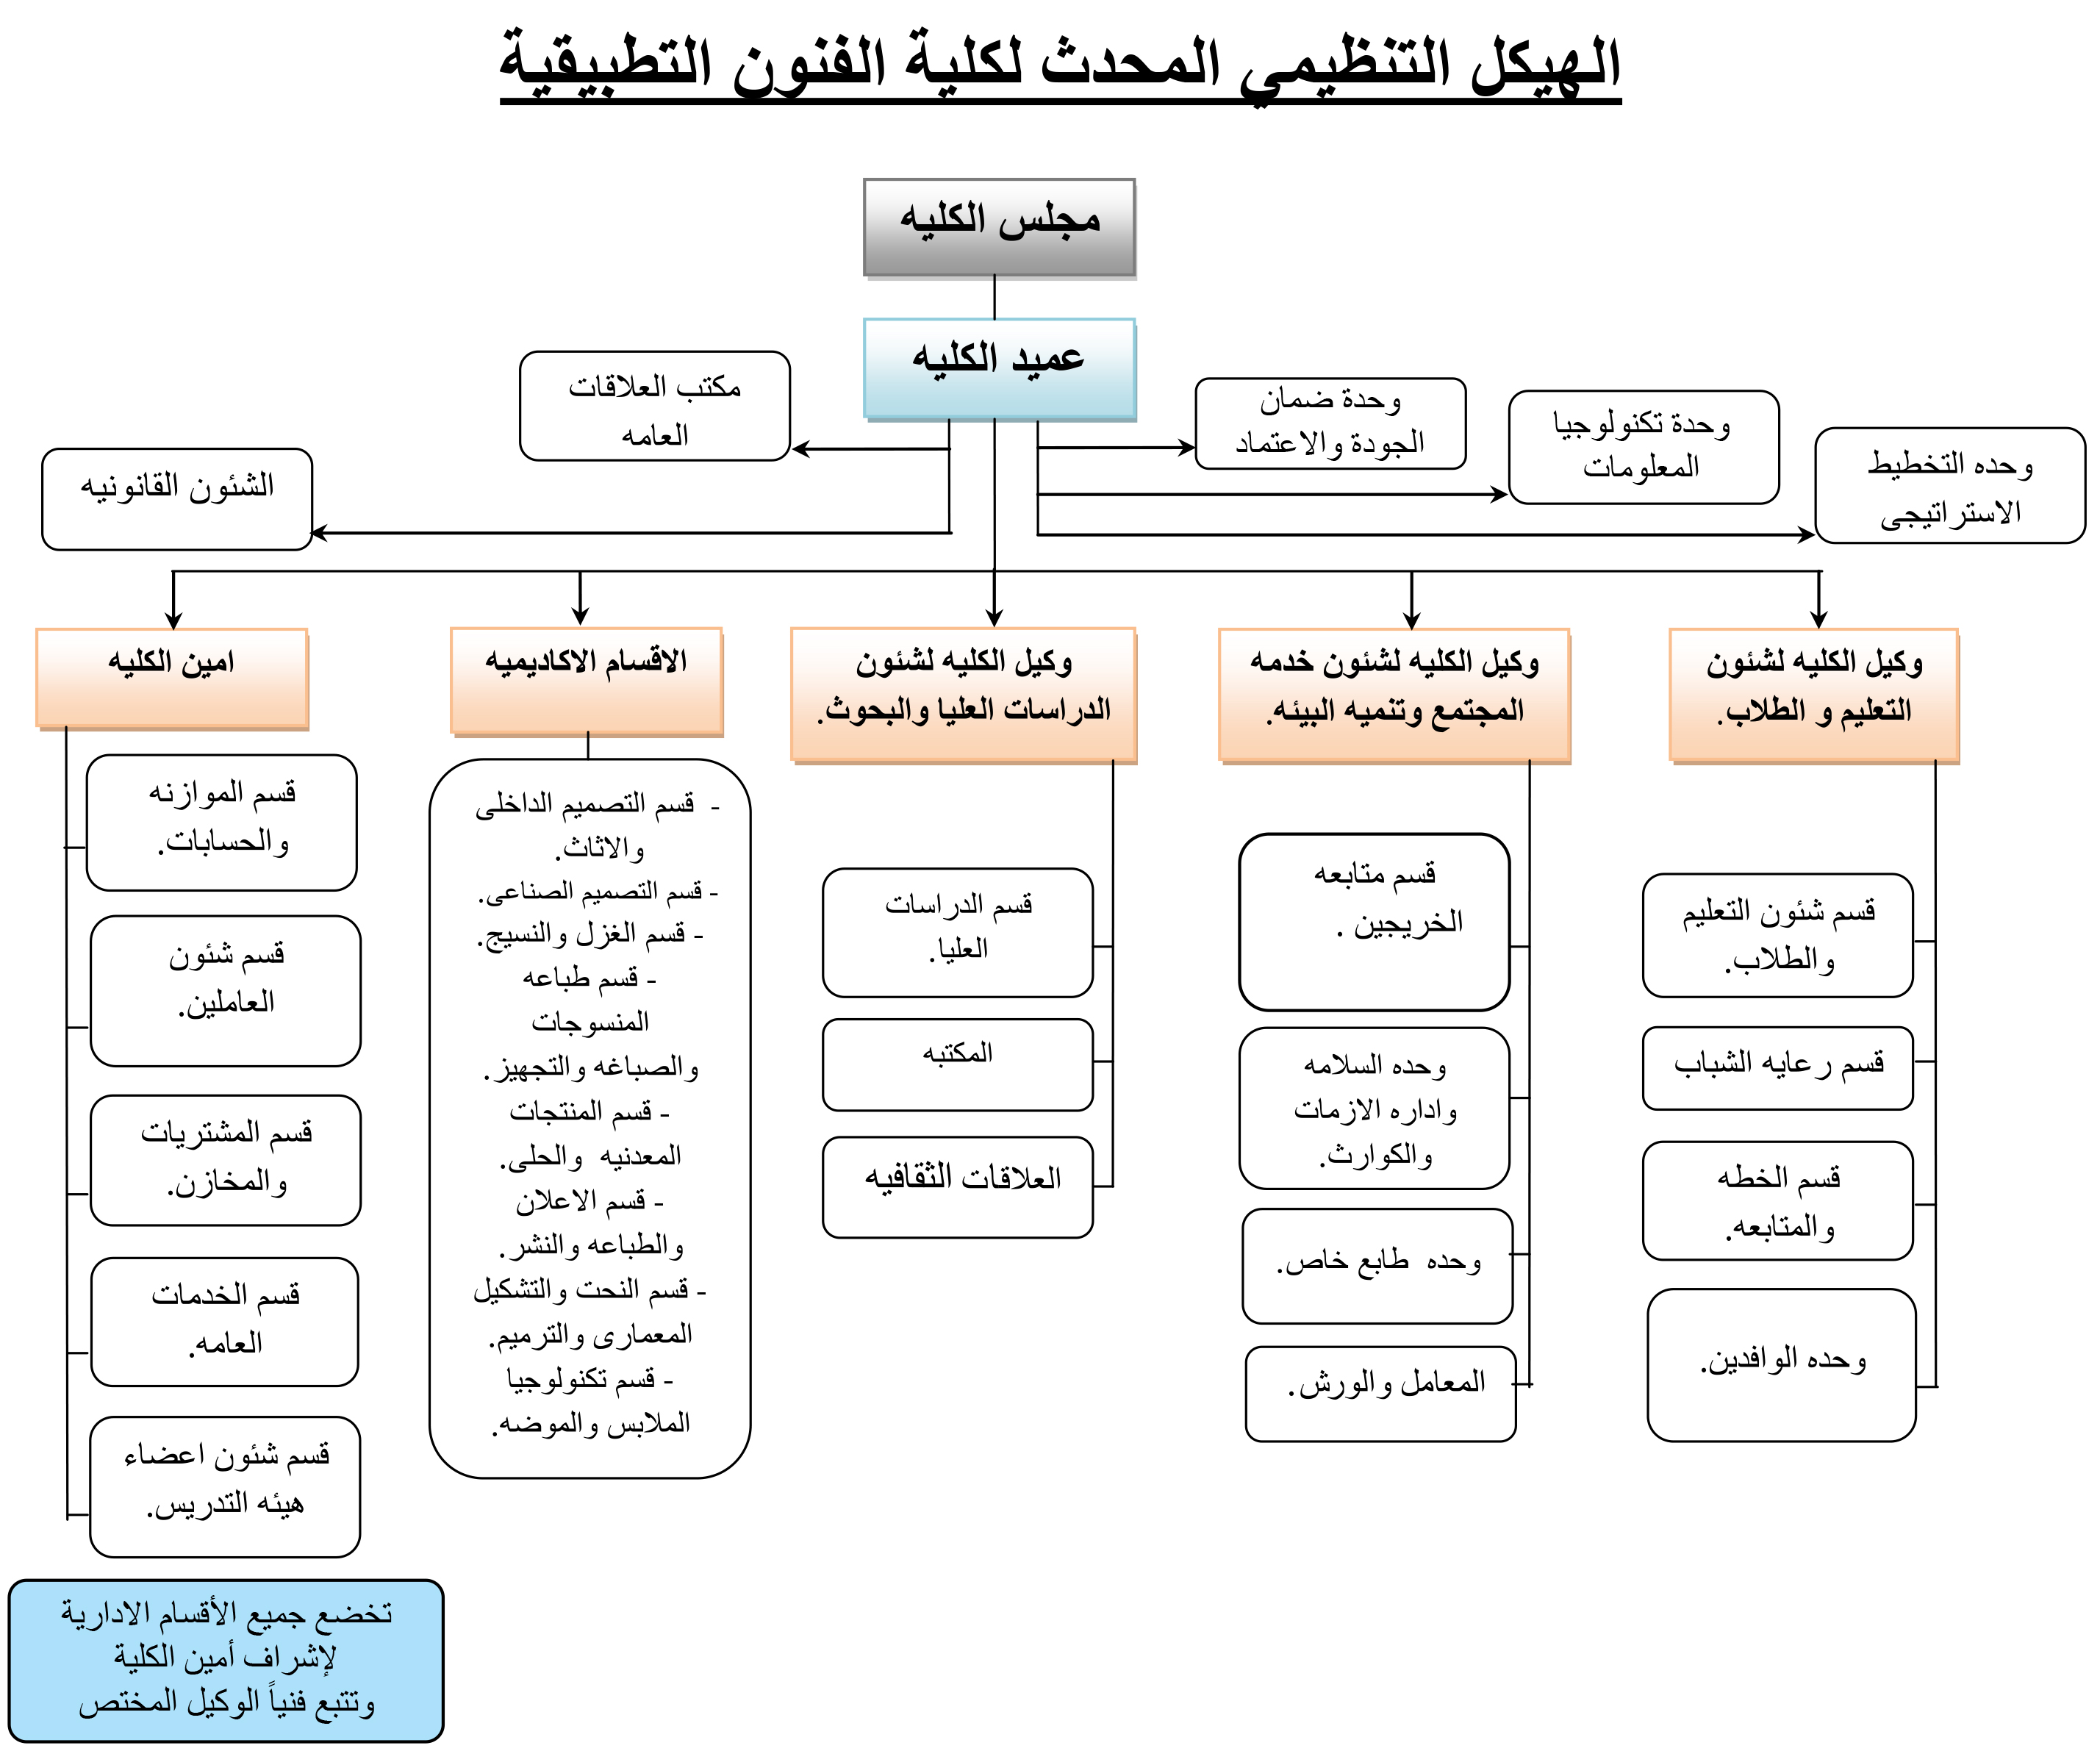 Organizational structure of faculty